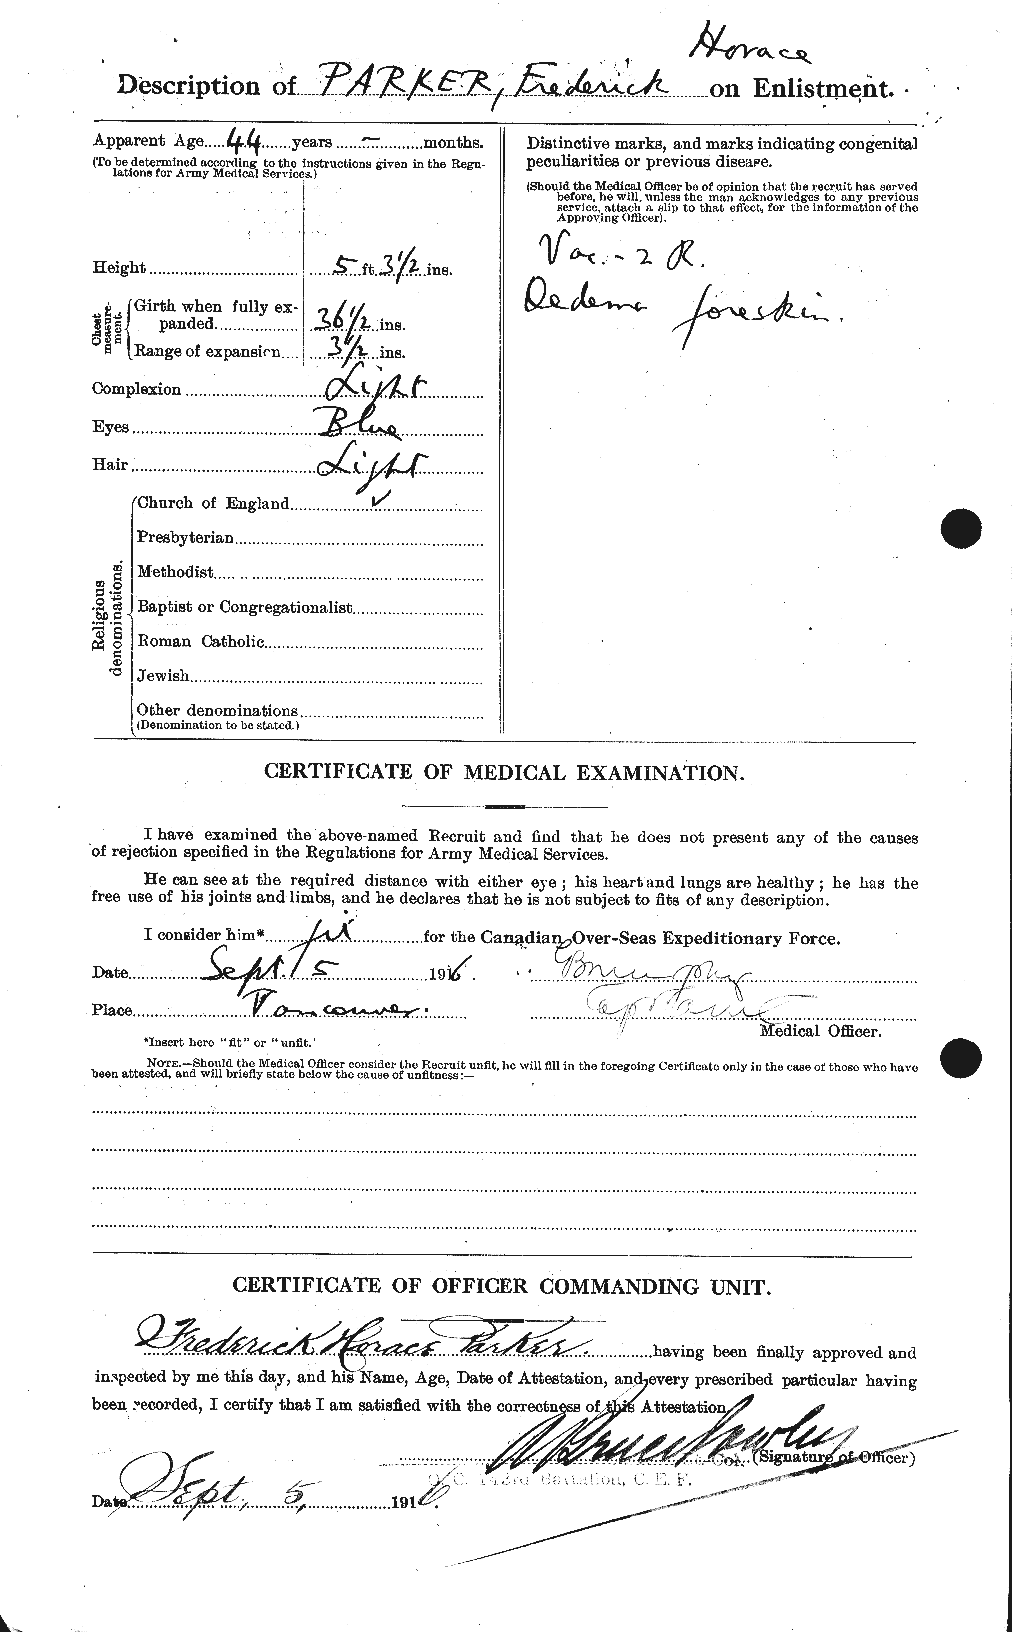 Personnel Records of the First World War - CEF 565216b